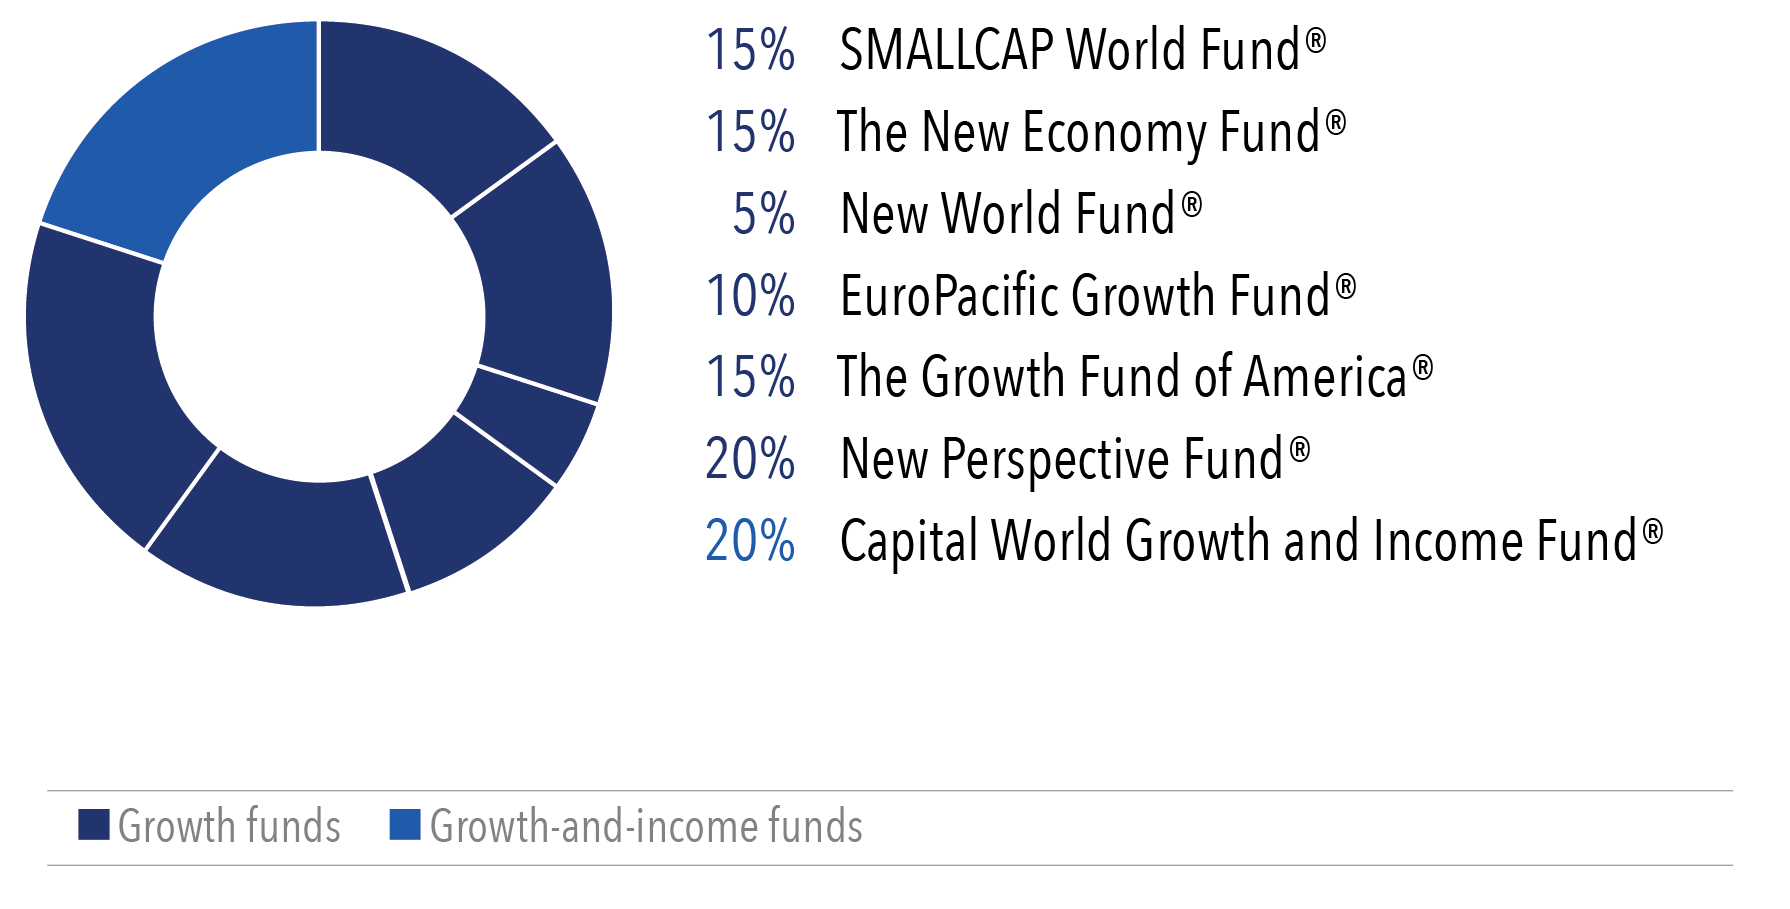 Donut chart displays a target allocation of 15% to SMALLCAP World Fund, 15% to The New Economy Fund, 5% to New World Fund, 10% to EuroPacific Growth Fund, 15% to The  Growth Fund of America, 20% to New Perspective Fund, 20% to Capital World Growth and Income Fund. 